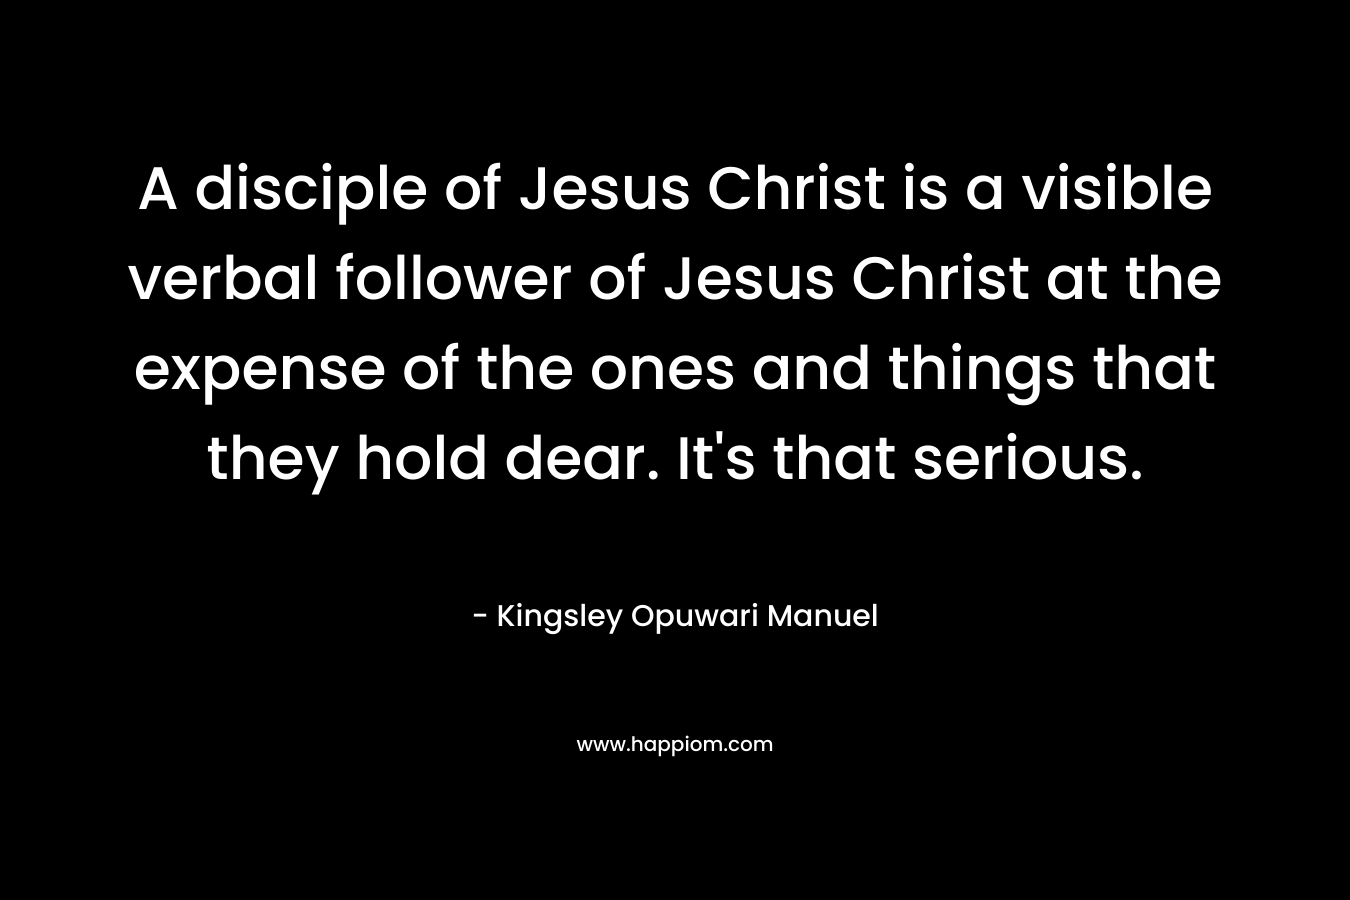 A disciple of Jesus Christ is a visible verbal follower of Jesus Christ at the expense of the ones and things that they hold dear. It’s that serious. – Kingsley Opuwari Manuel